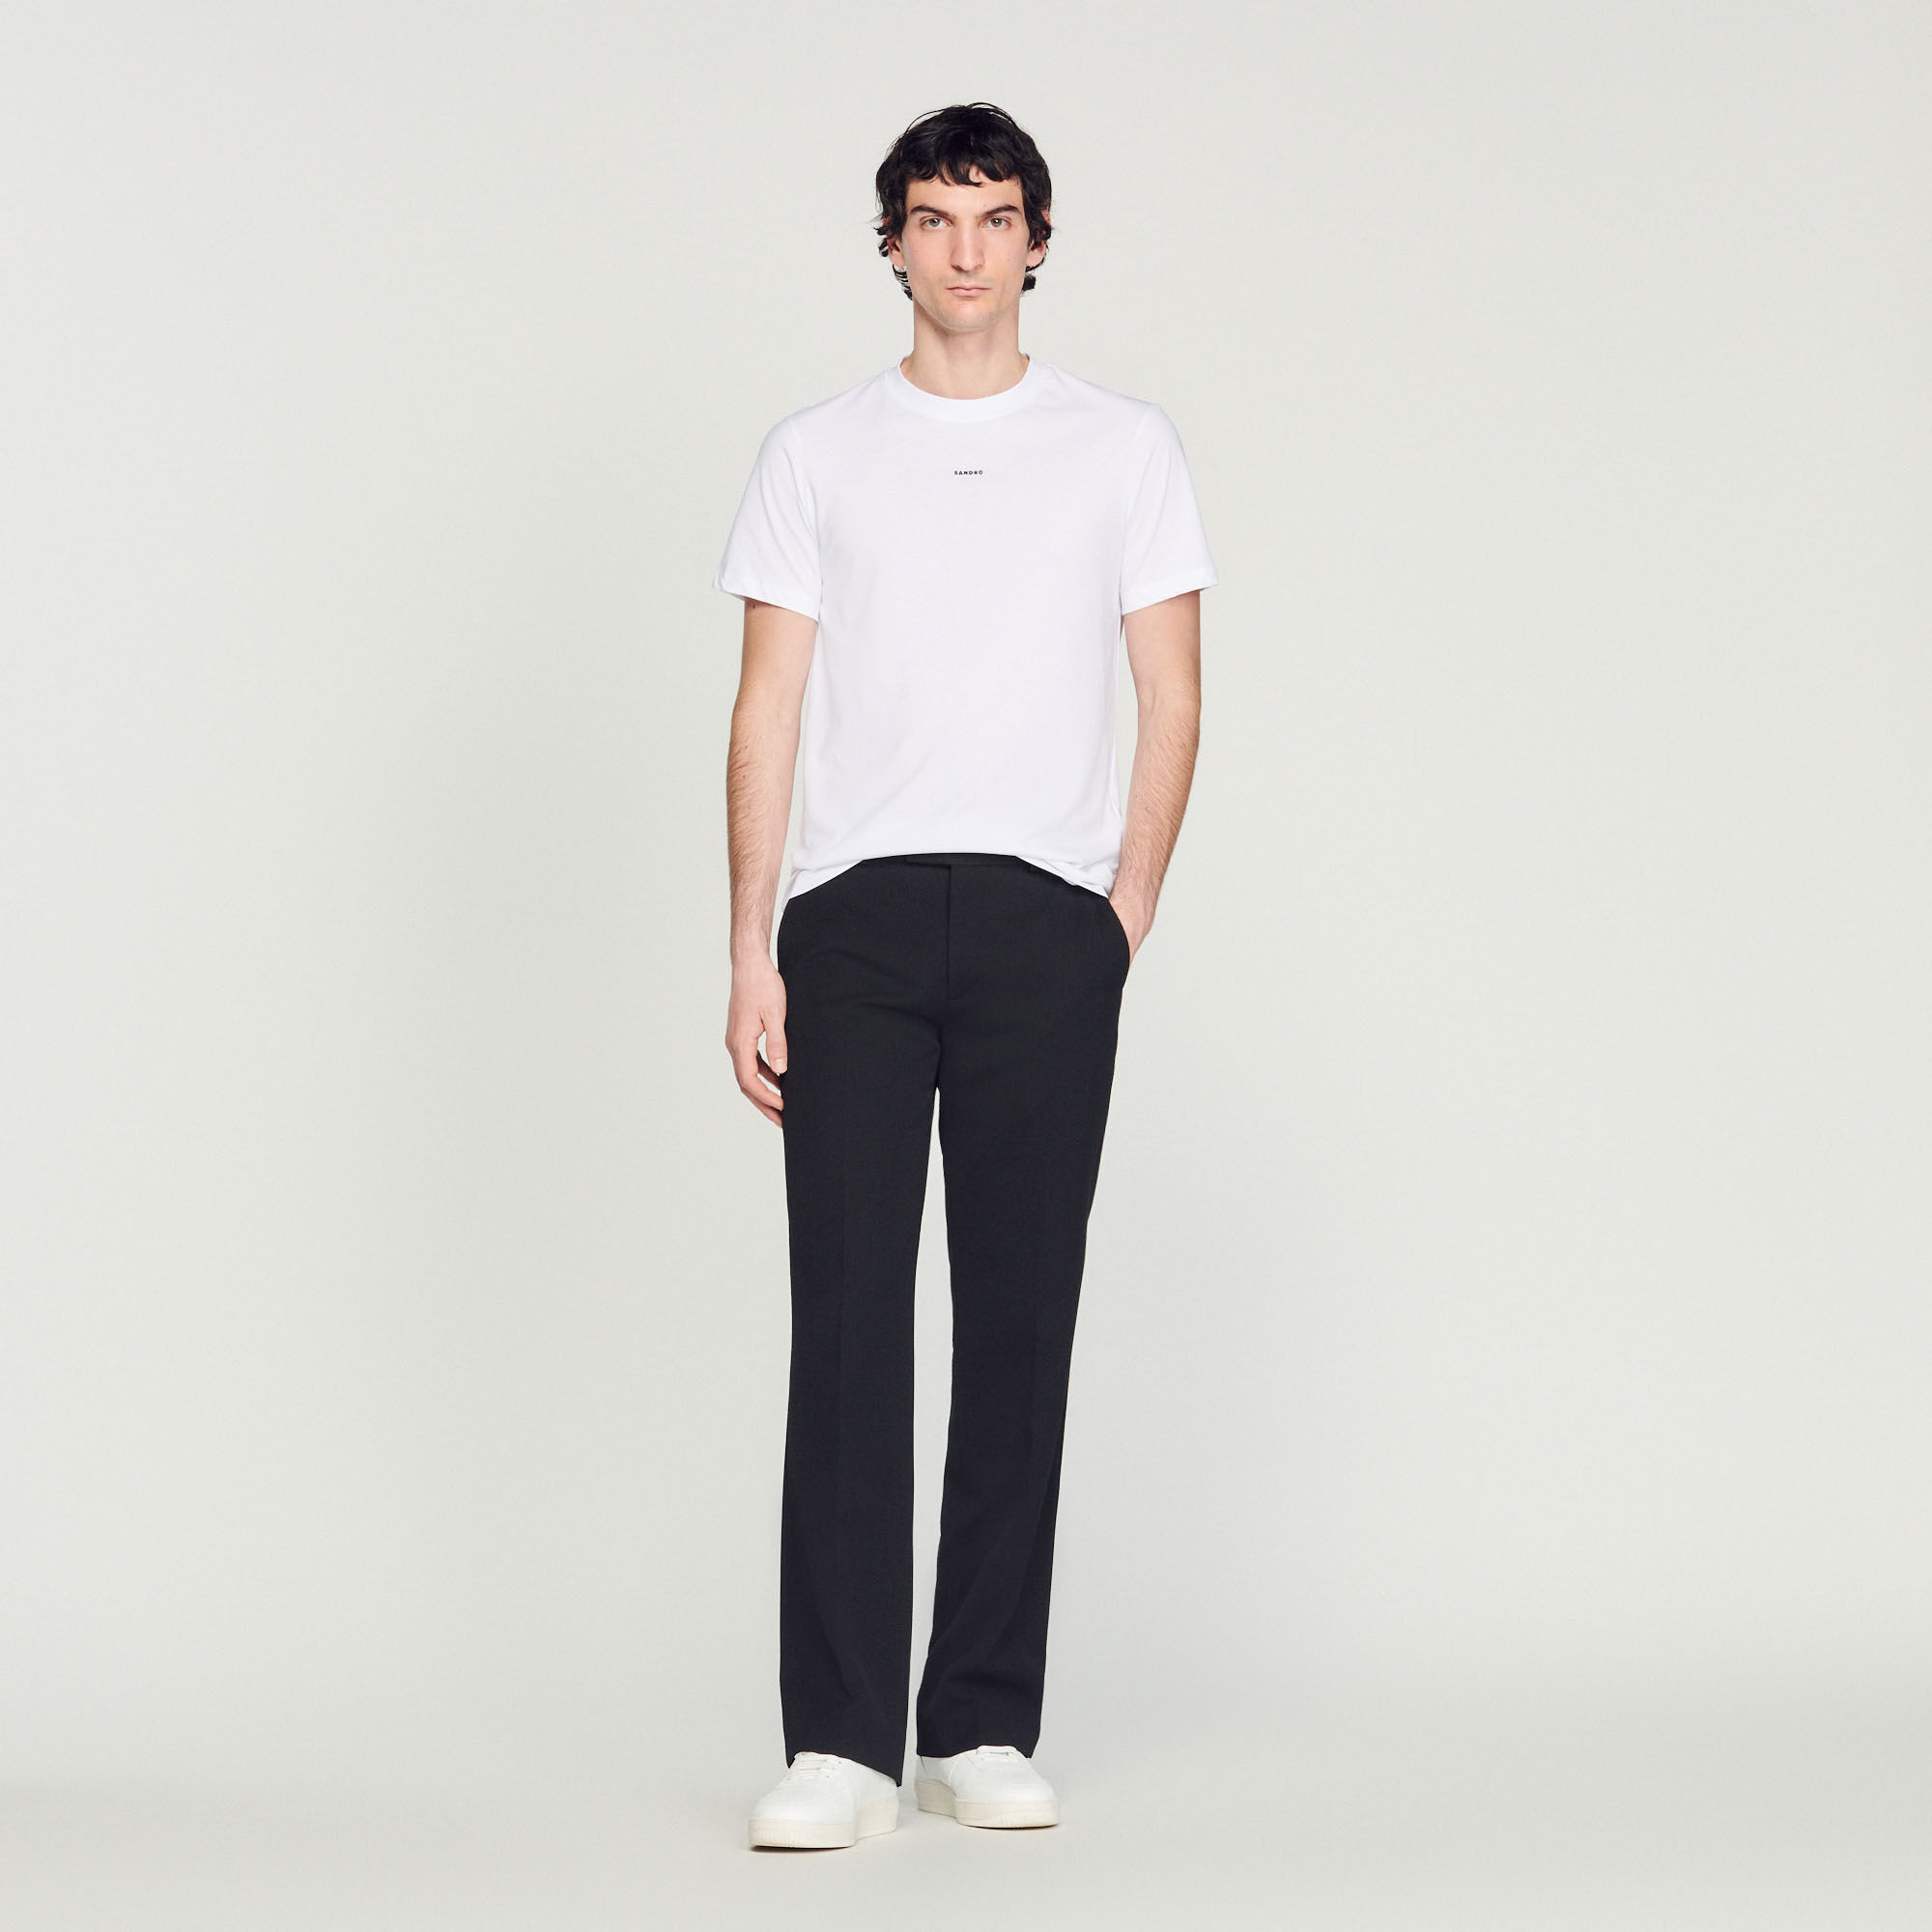 Sandro embroidered T-shirt